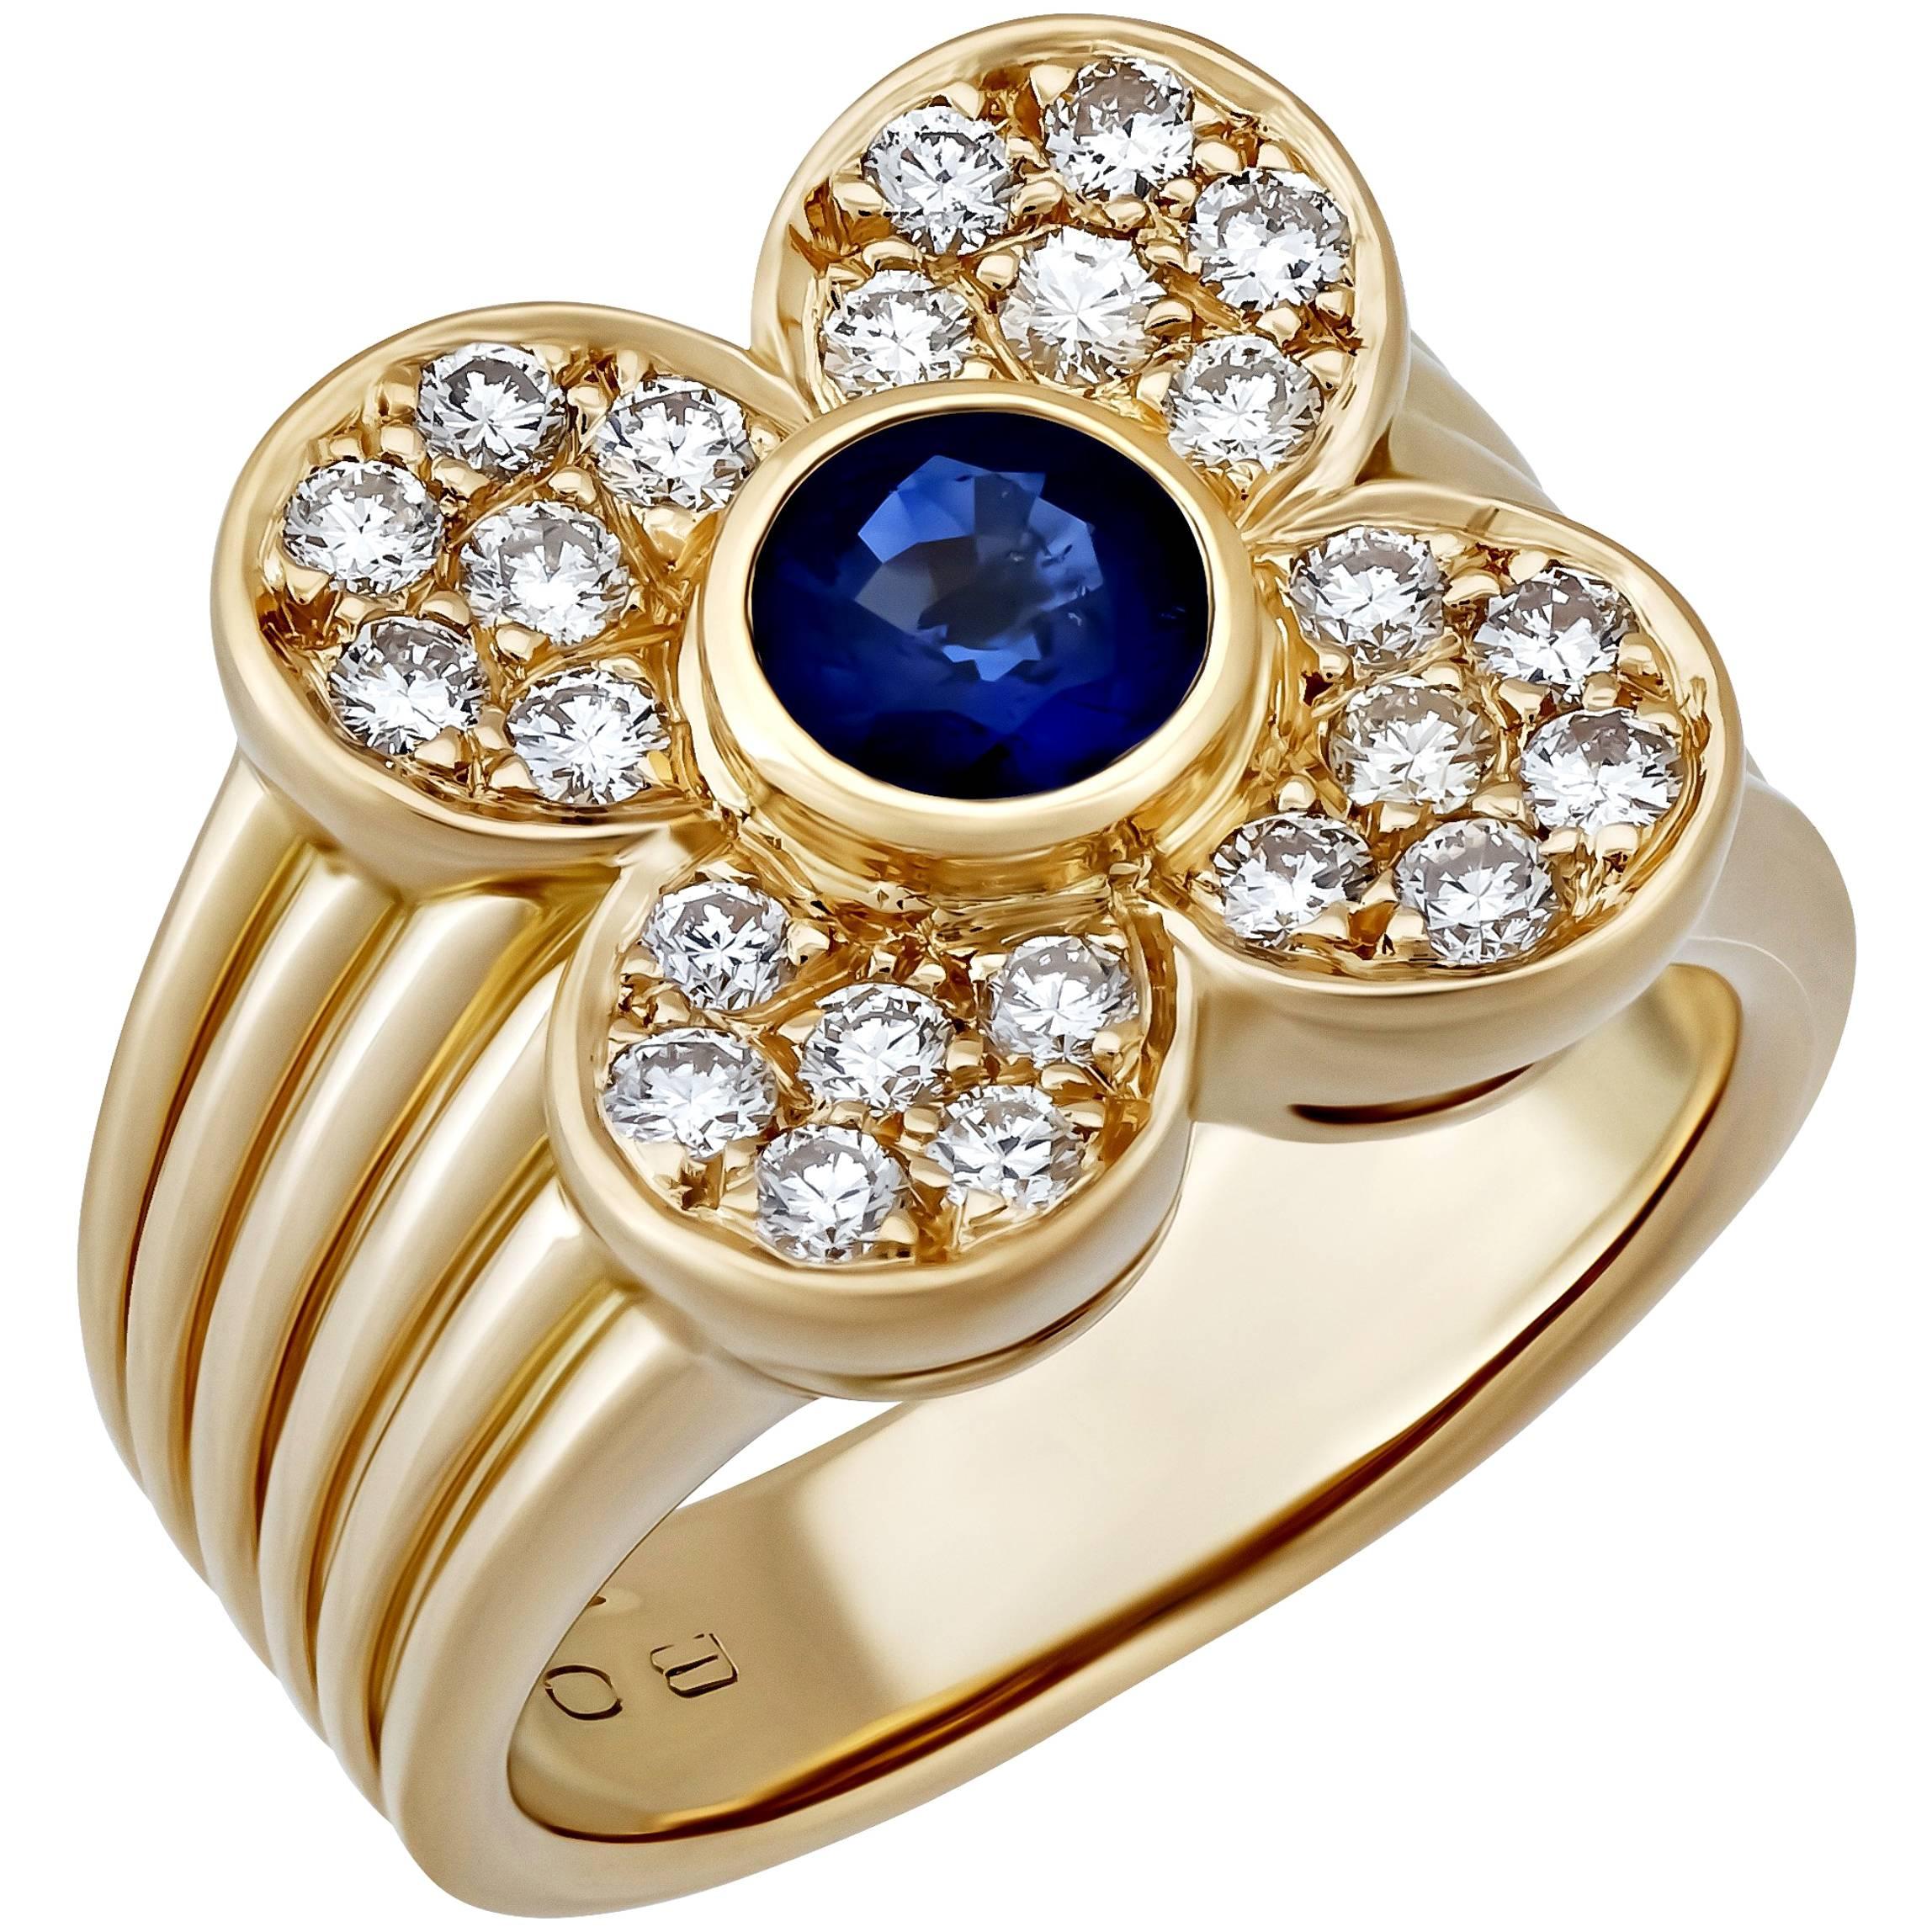 Van Cleef & Arpels 18K Yellow Gold Diamond and Sapphire Floral Ring Size: 5.75